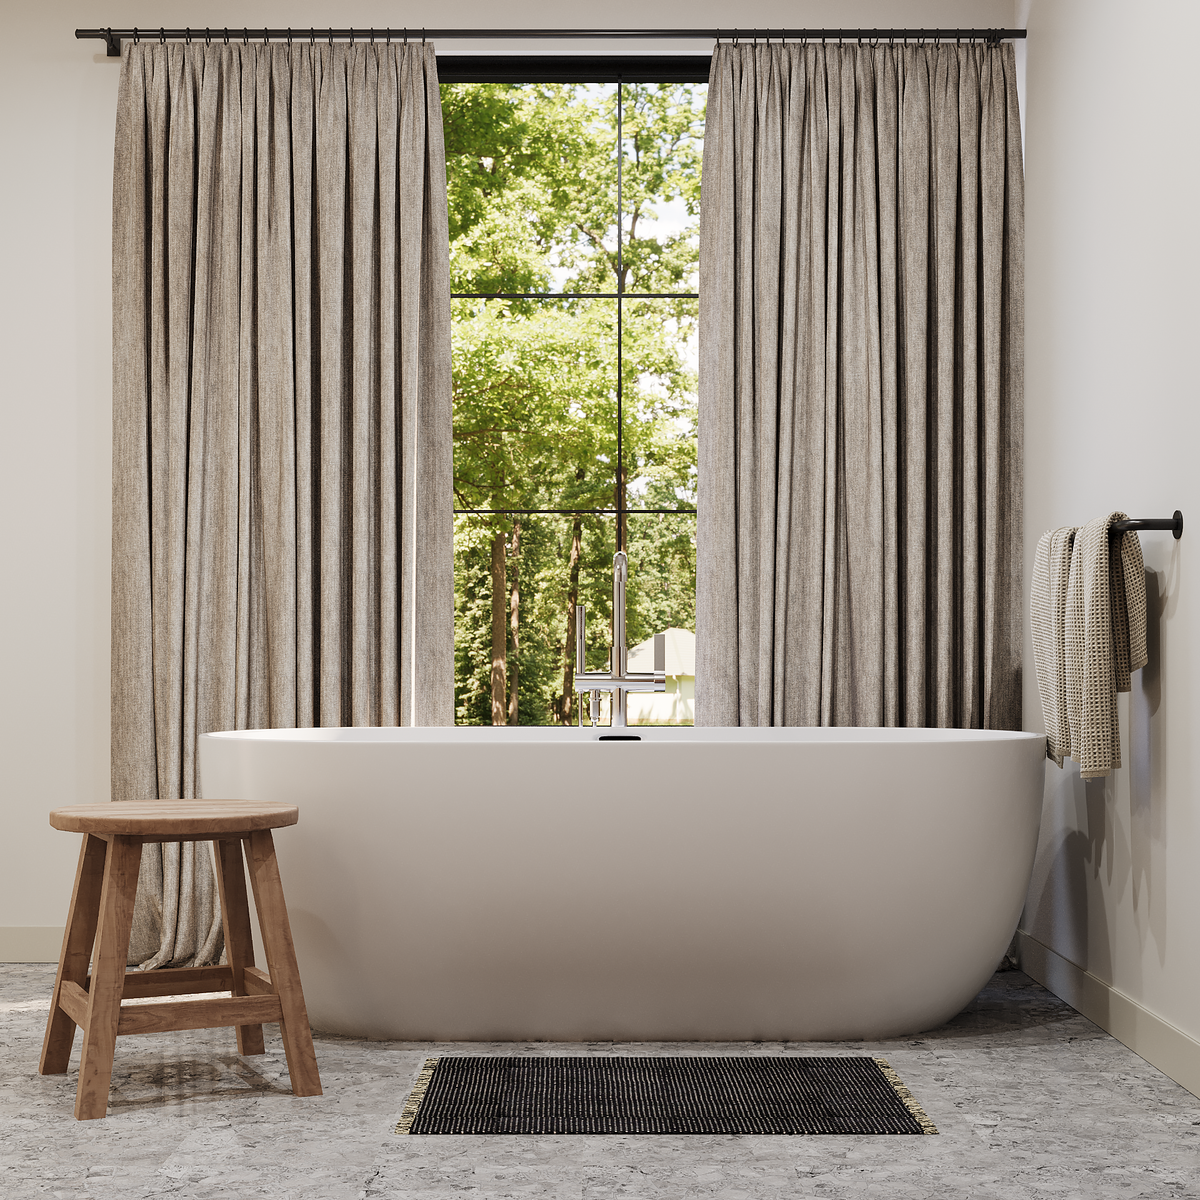 Willow Collection freestanding tub in bathroom setting.